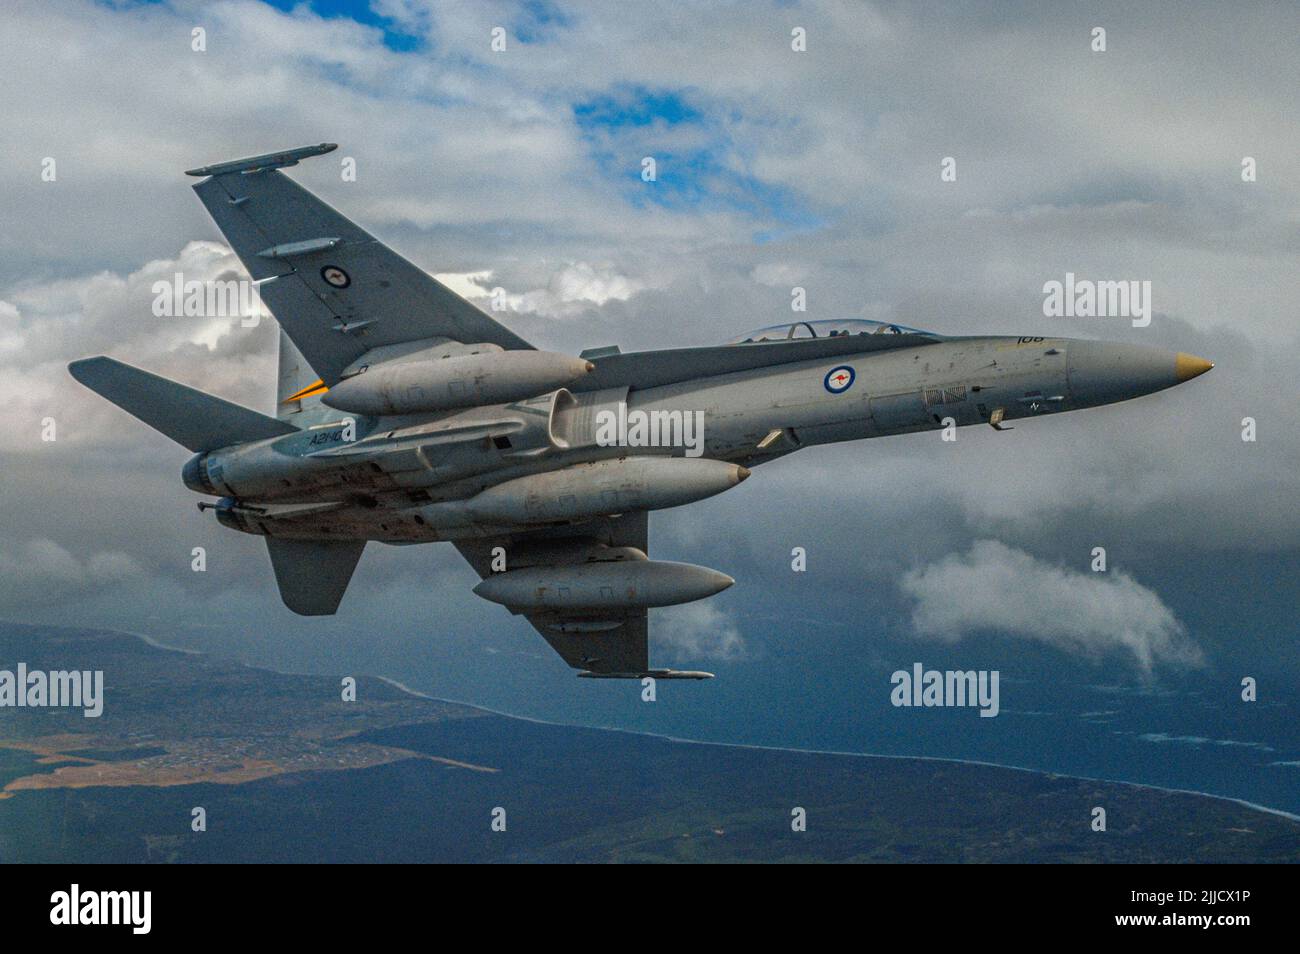 An air to air shot of an RAAF, two seat, McDonnell Douglas (now Boeing) F/A18 Hornet jet fighter banking. Stock Photo